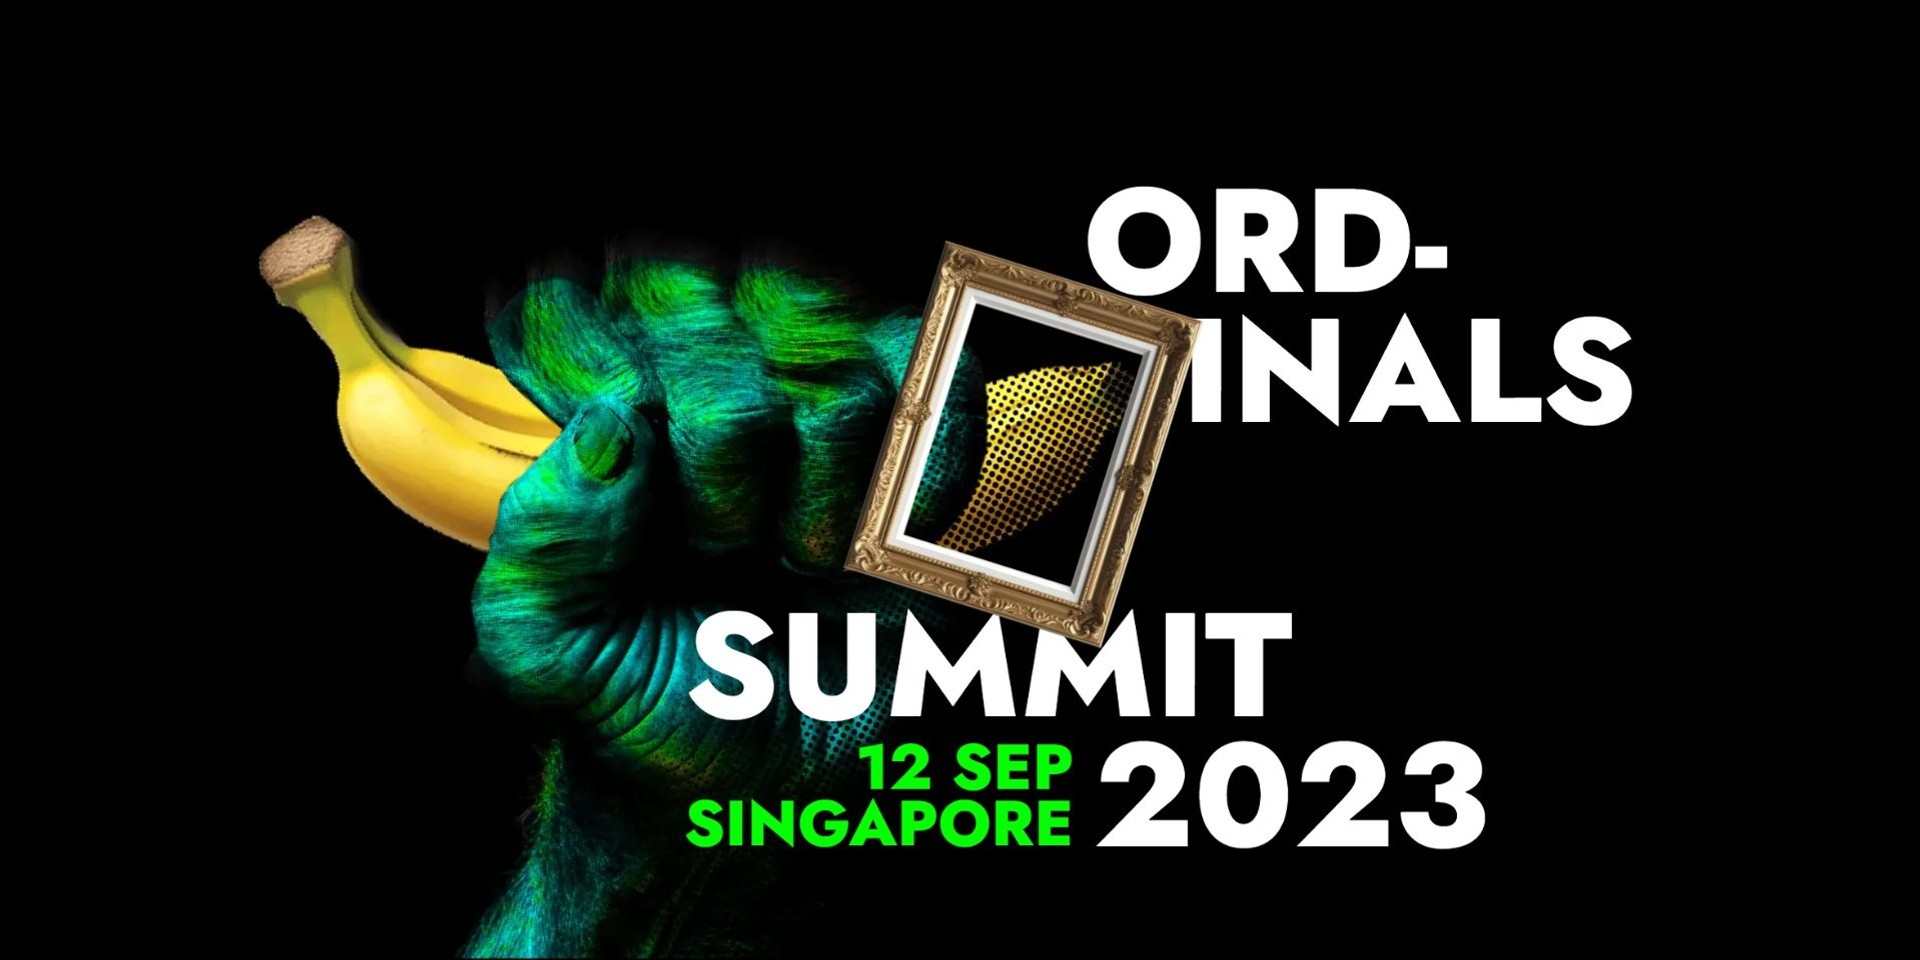 Ordinals Summit to hold inaugural edition in Singapore this September